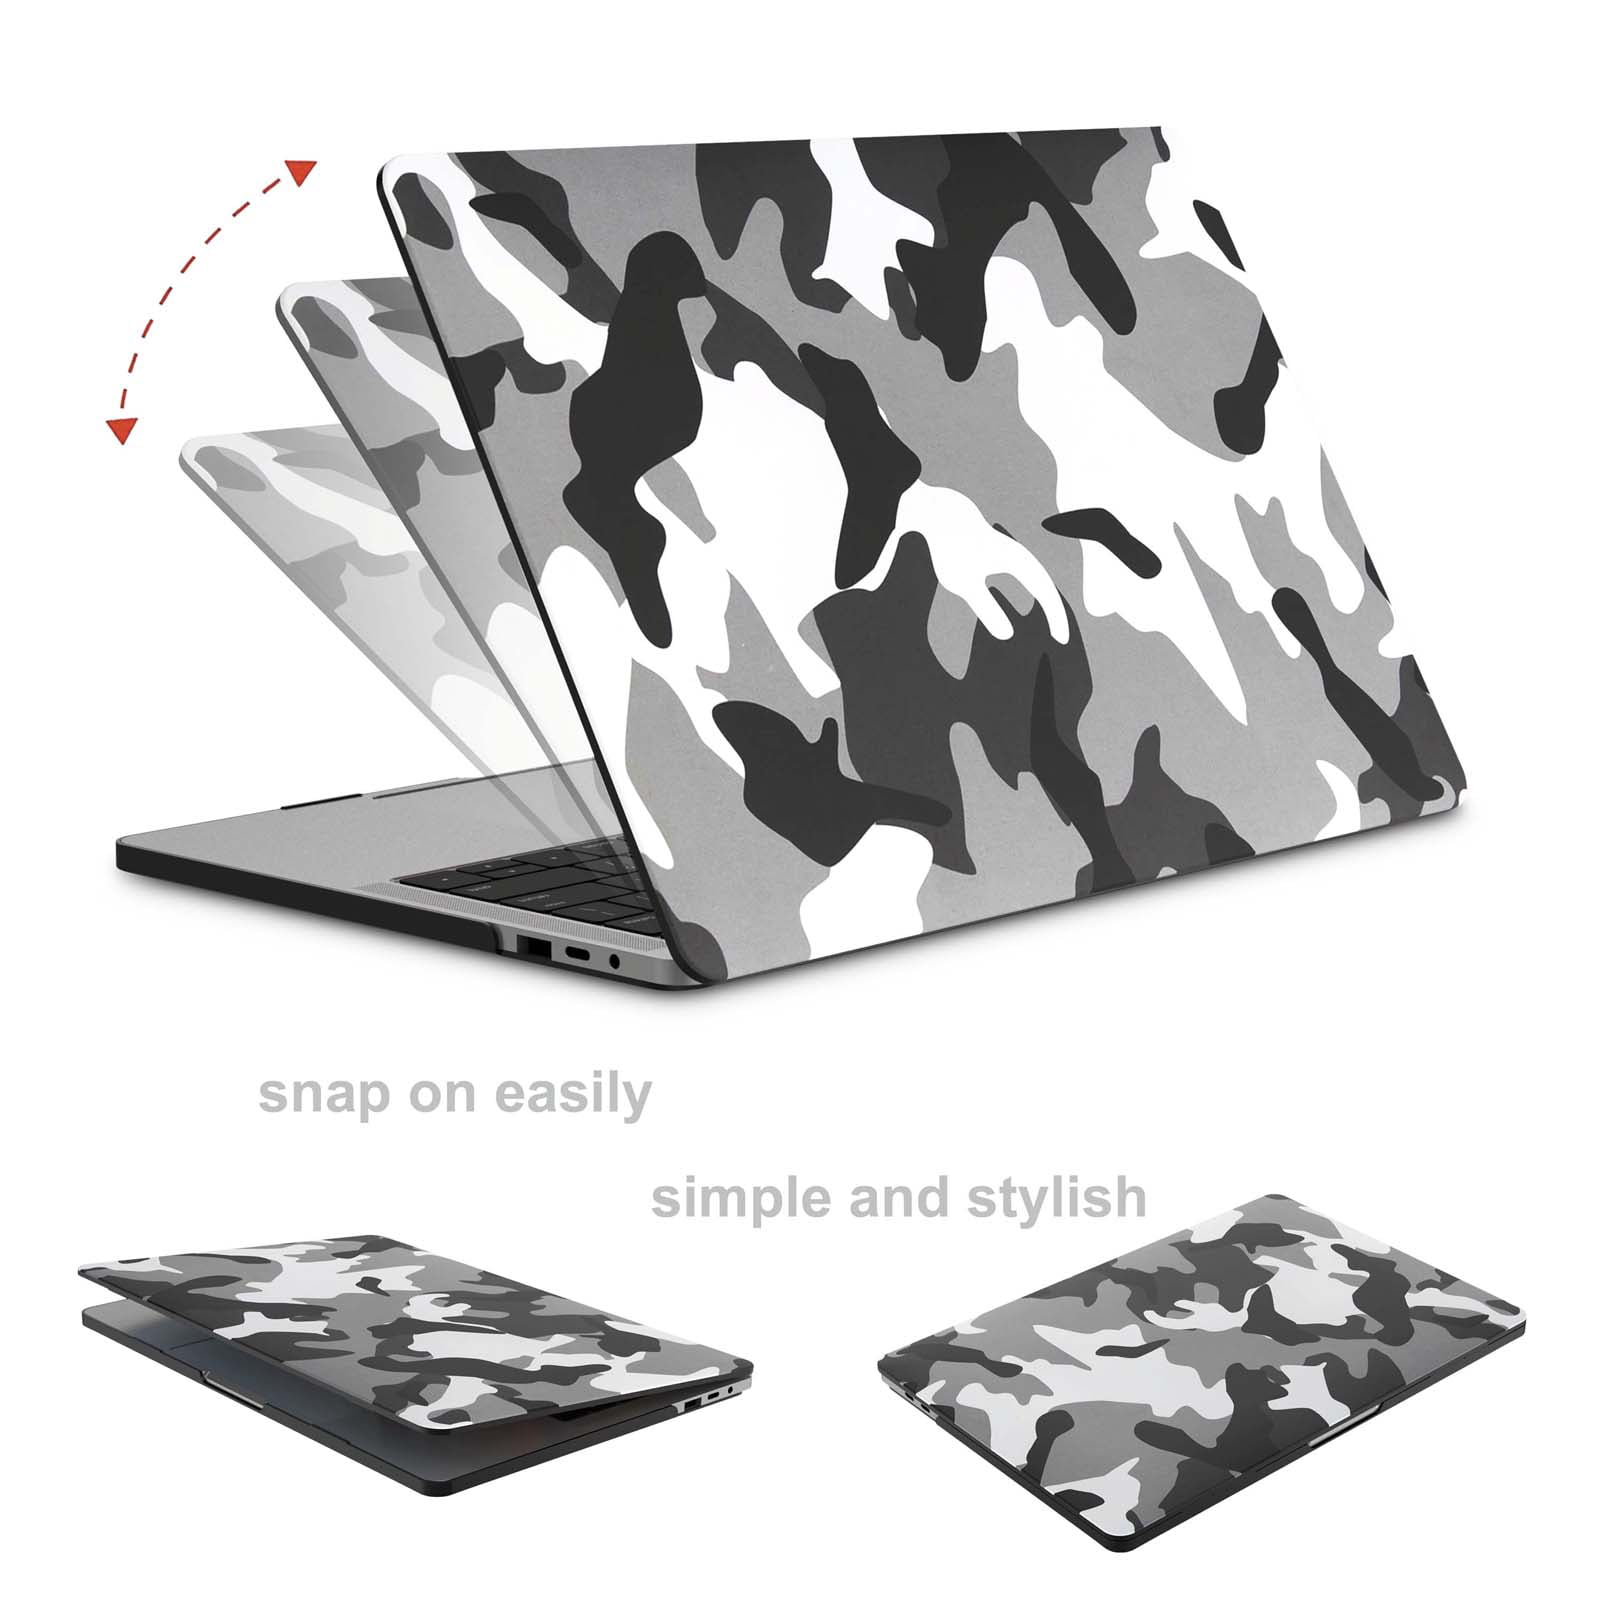 MacBook Air 13 Inch Case A1369/A1466, Tekcoo Laptop Case with Camouflage  Design, Plastic Hard Shell Protective Case Cover for MacBook Air 13.3 inch  (Model: A1369 & A1466) 